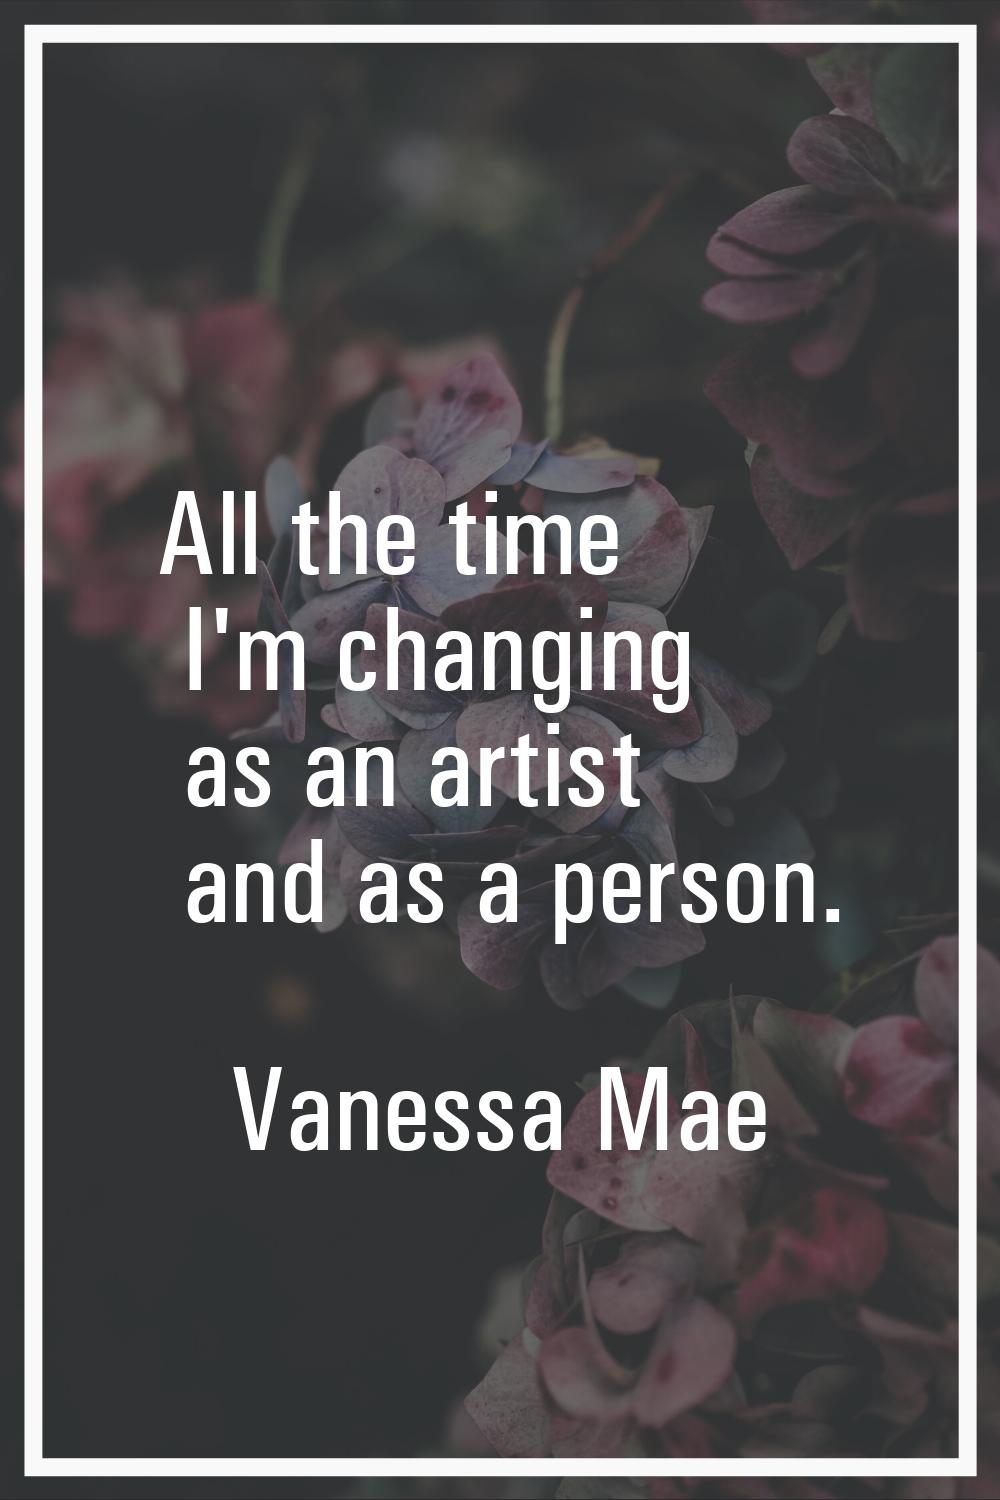 All the time I'm changing as an artist and as a person.